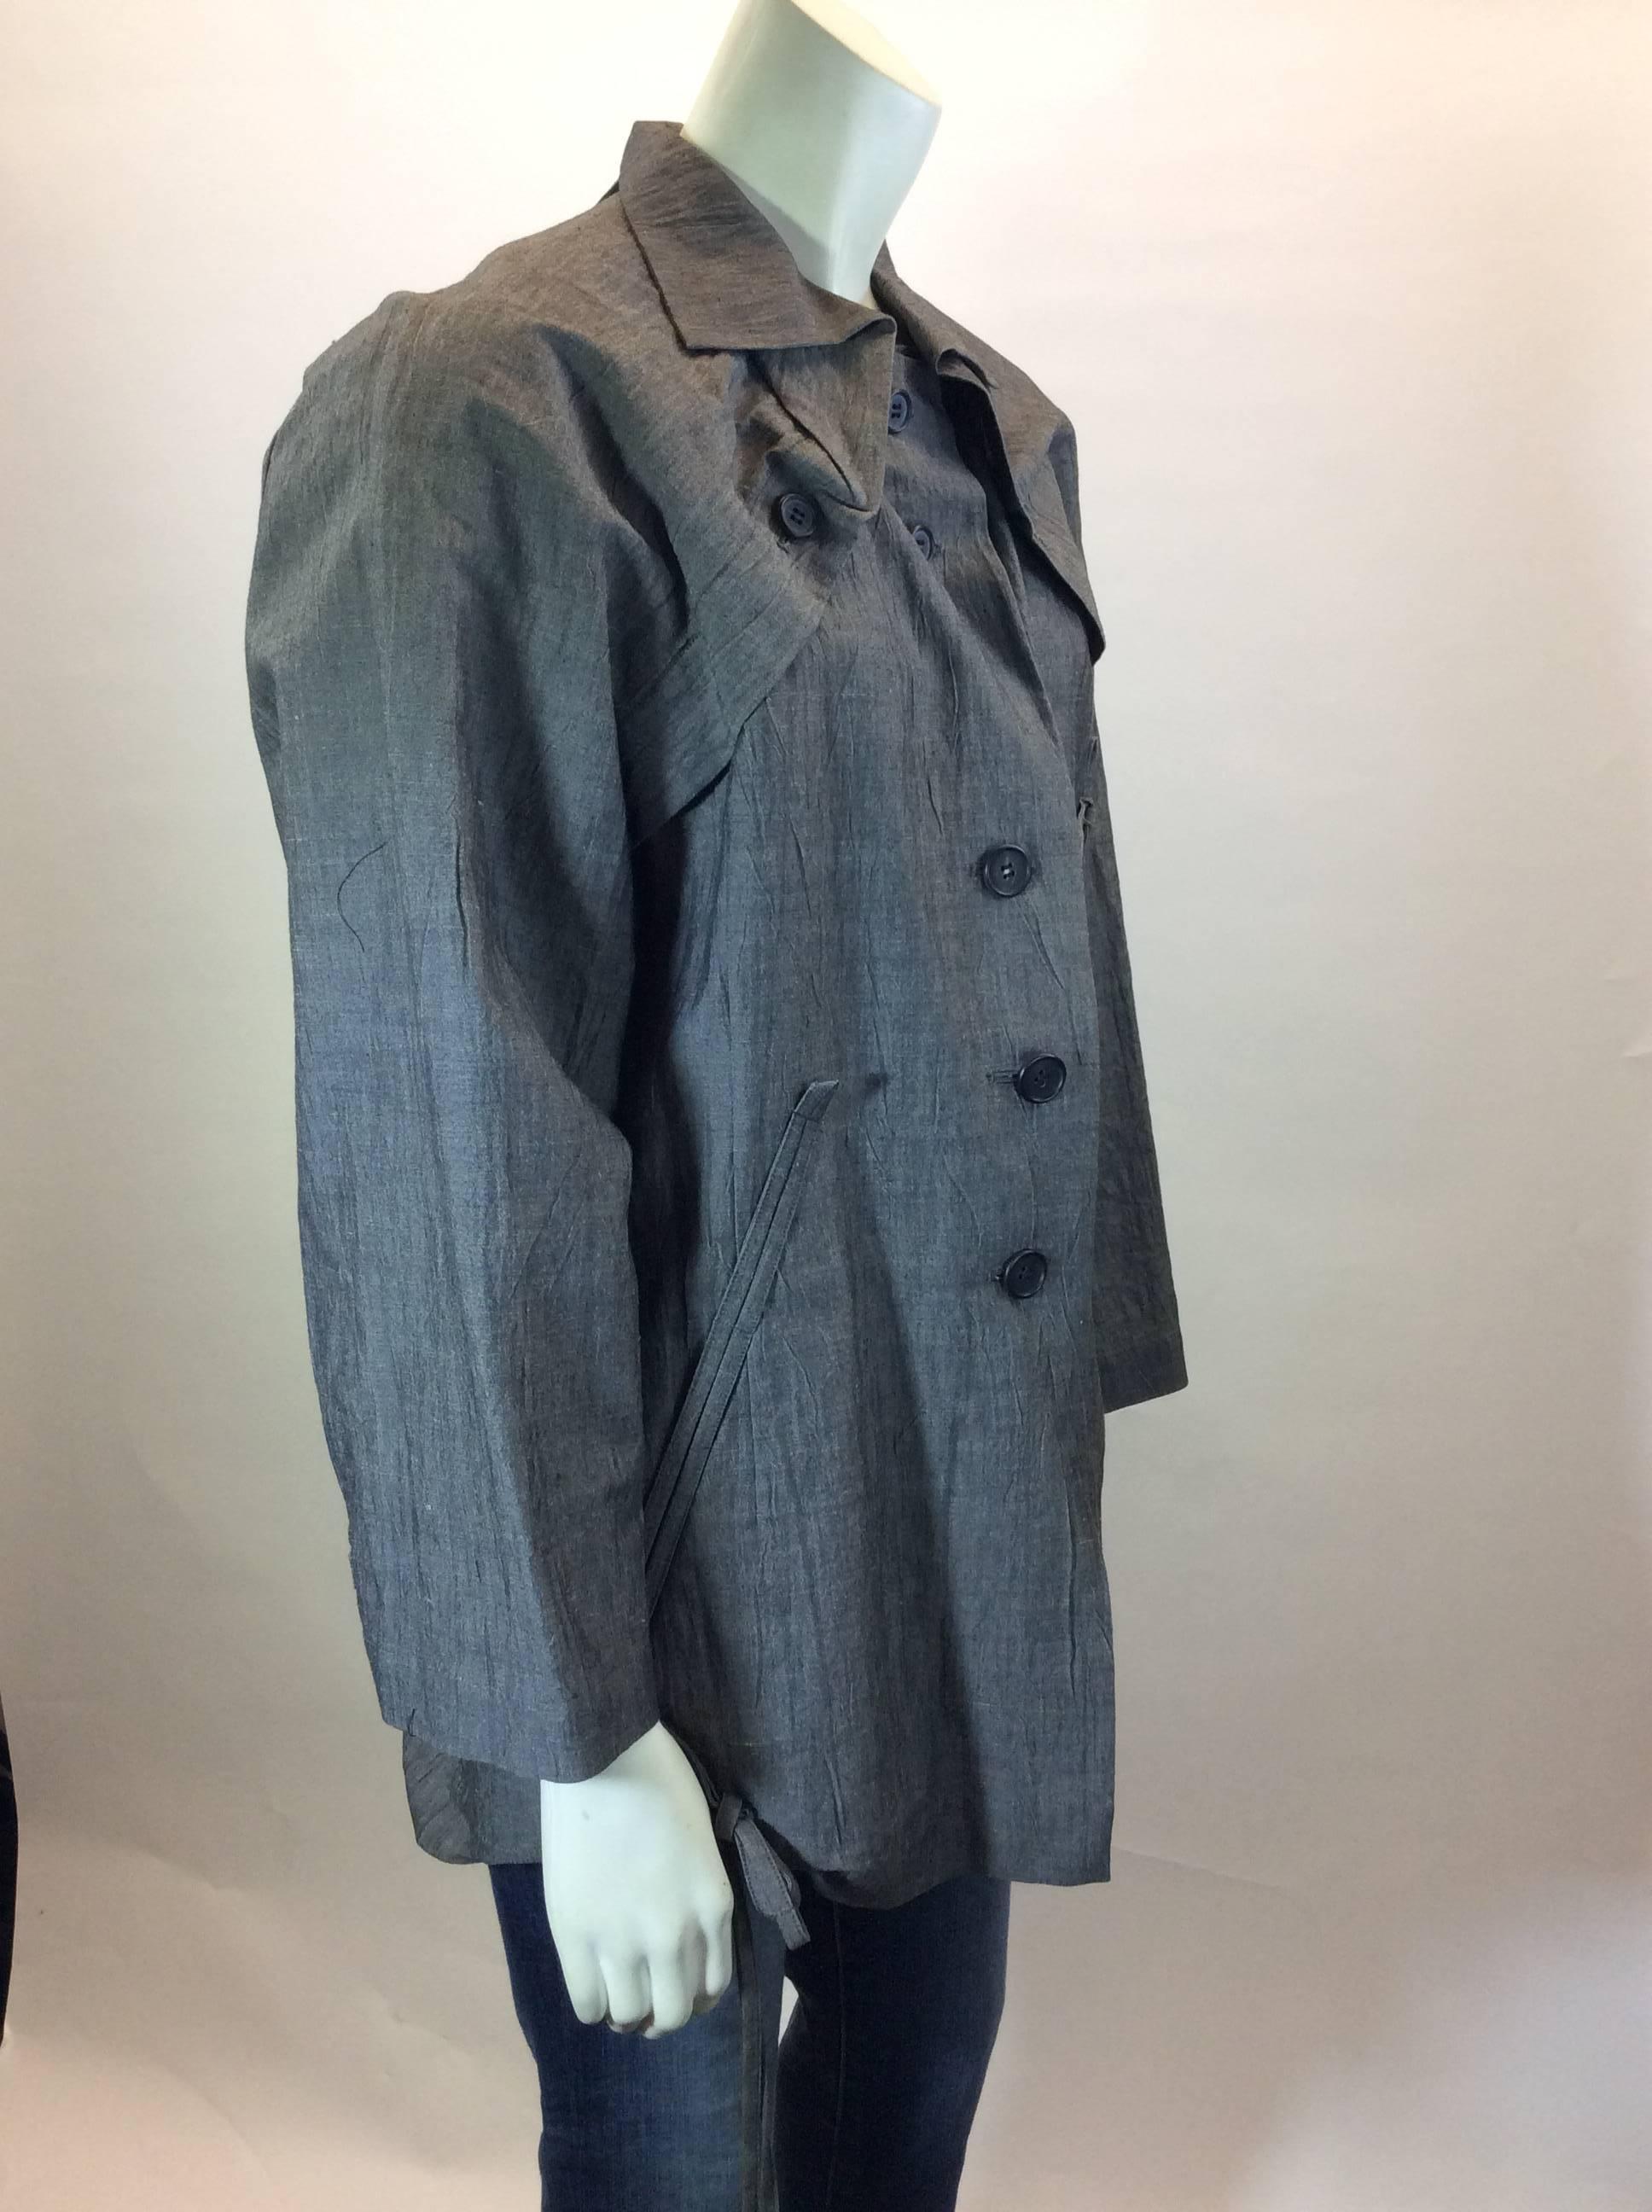 Grey Linen 
Buttons up front for Closure
Button Detail on Collar
Drawstrings on bottom of Coat
23